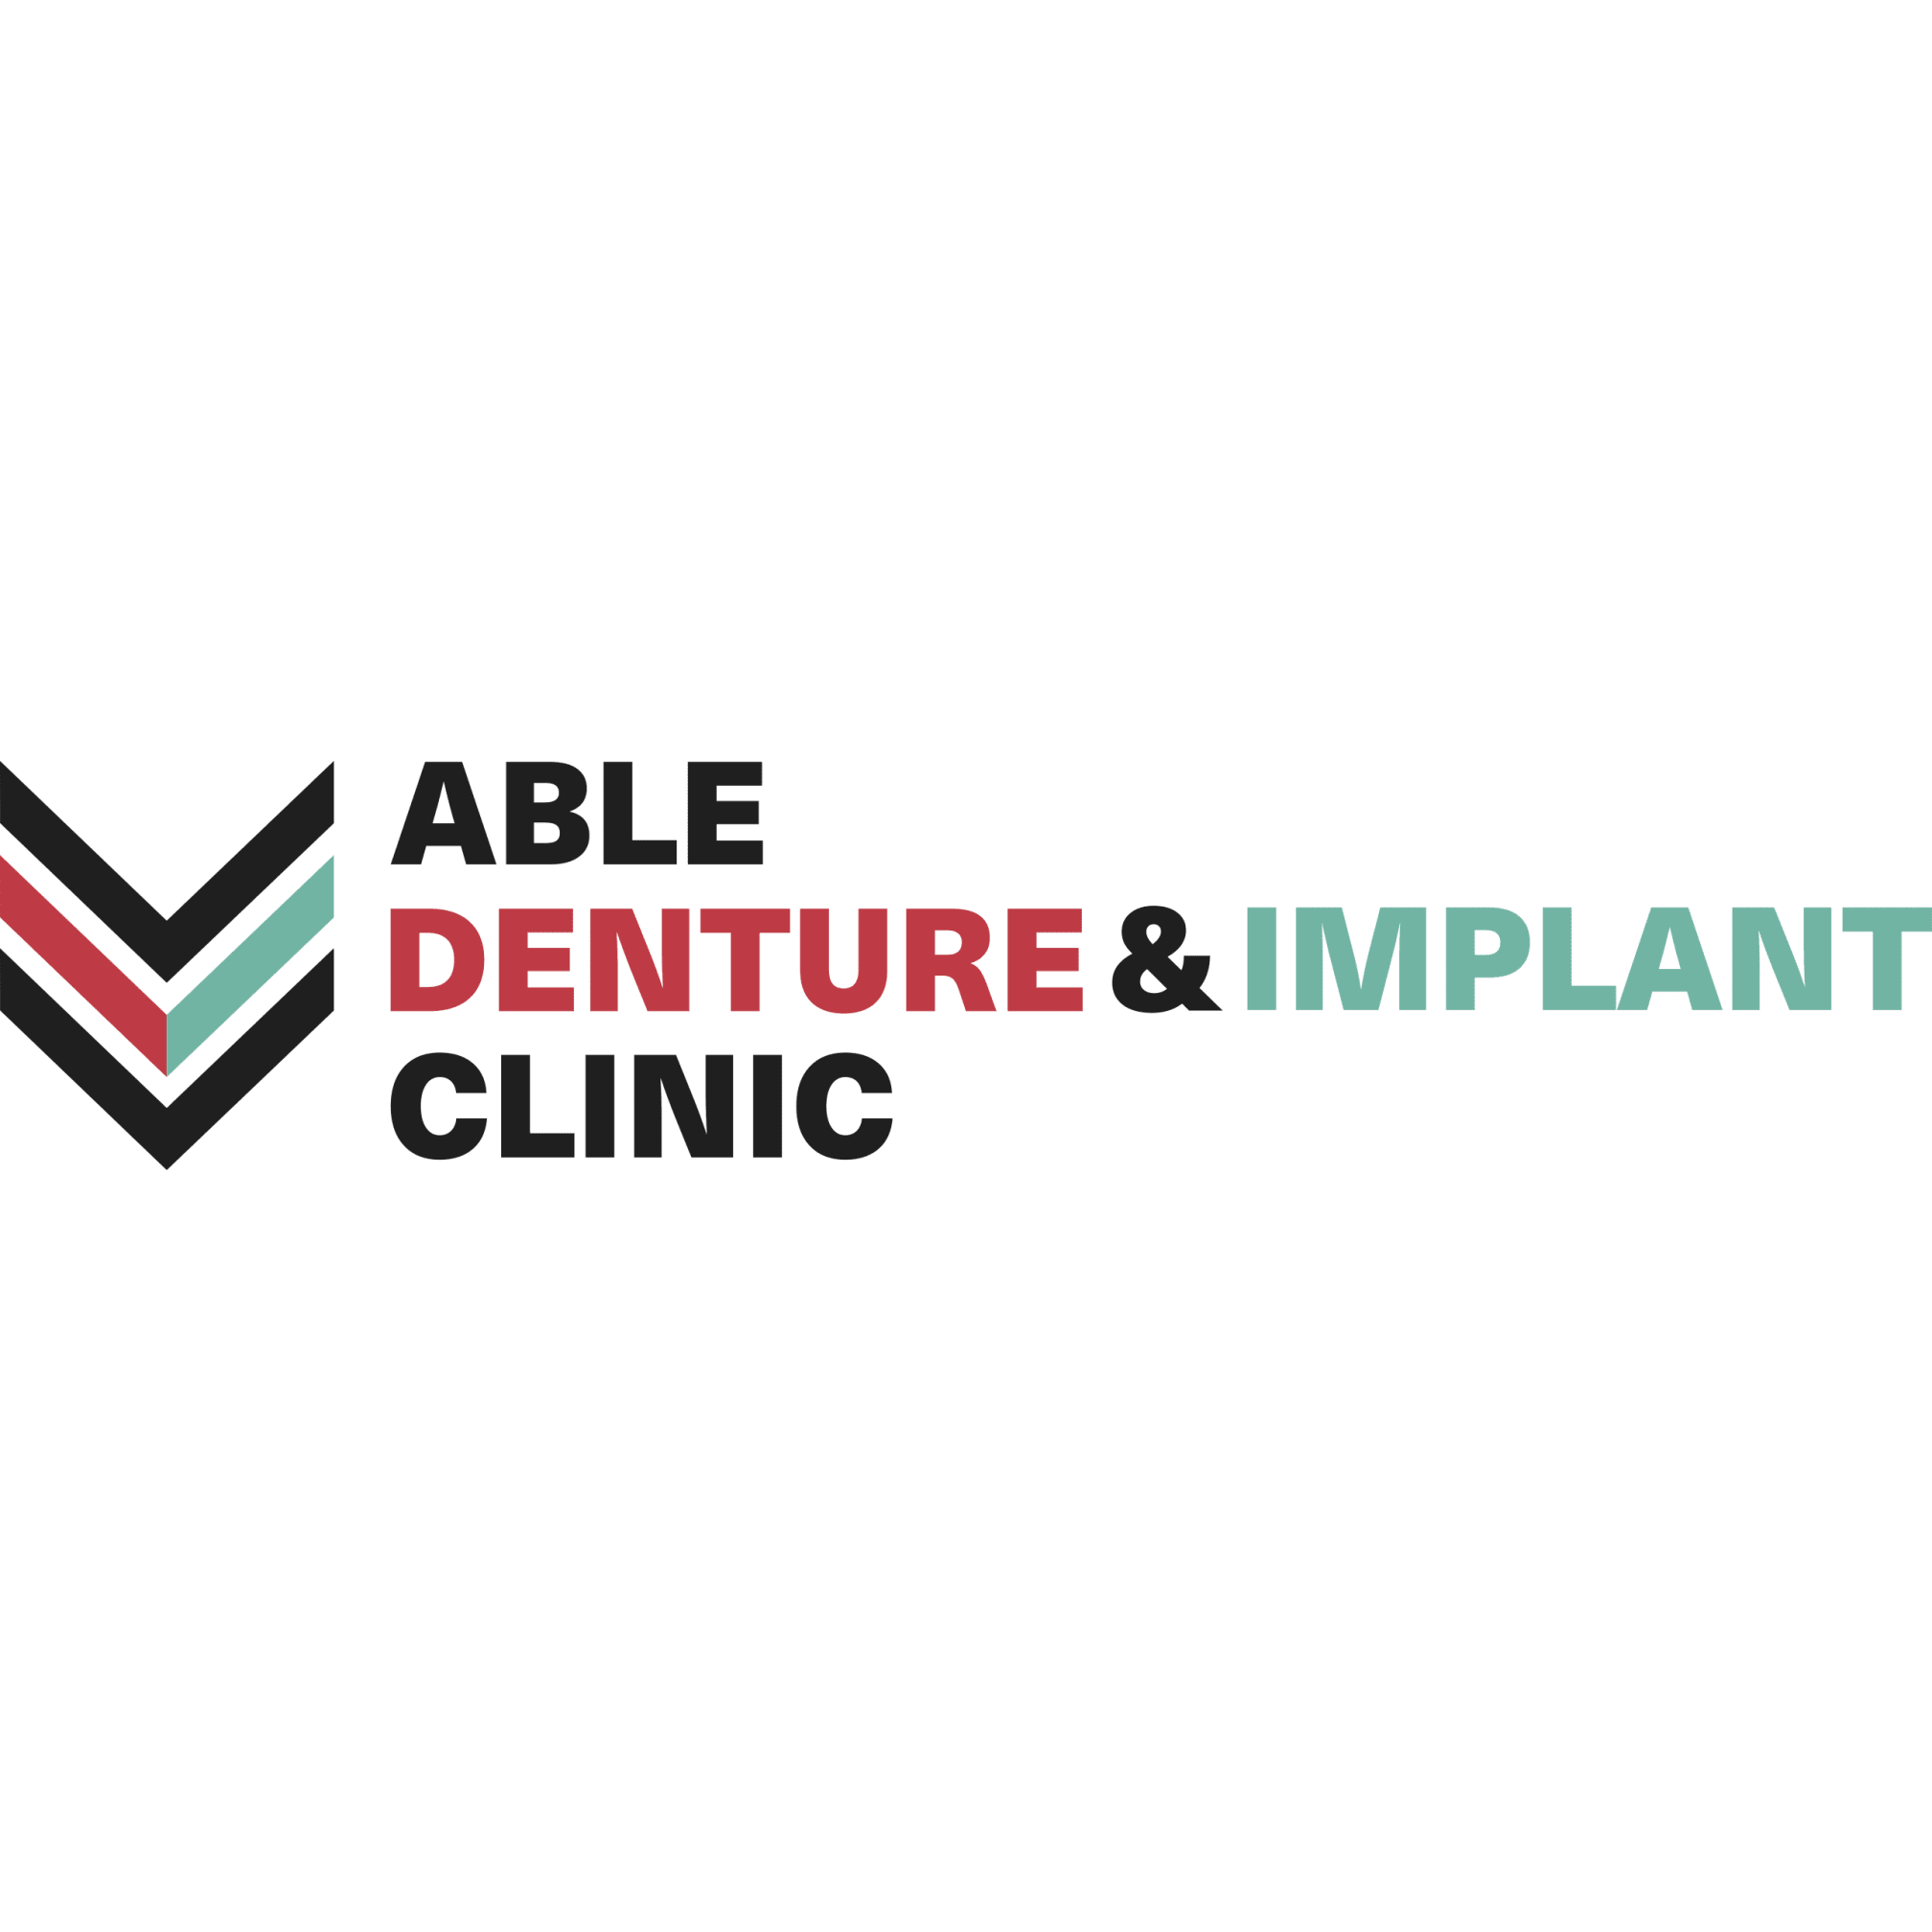 LOGO Able Denture & Implant Clinic Camberley 01276 25235